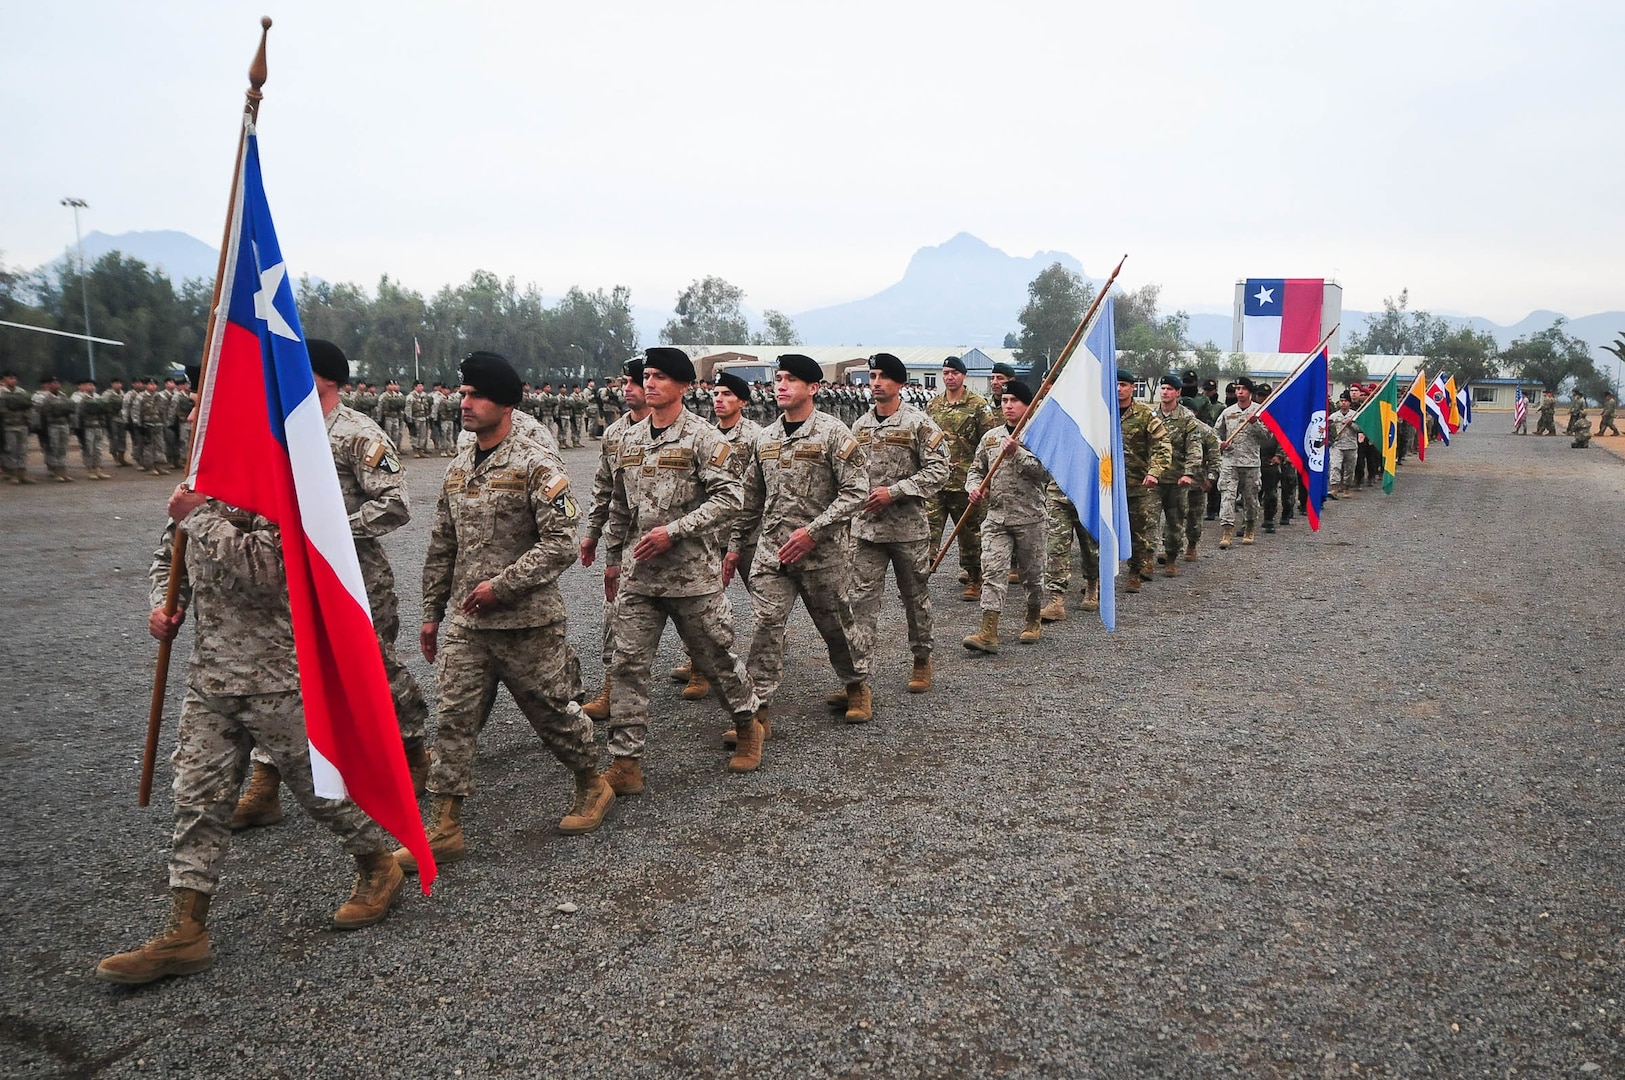 Special-forces soldiers from 19-different countries march across the parade field during the opening ceremony of Fuerzas Comando 2019.